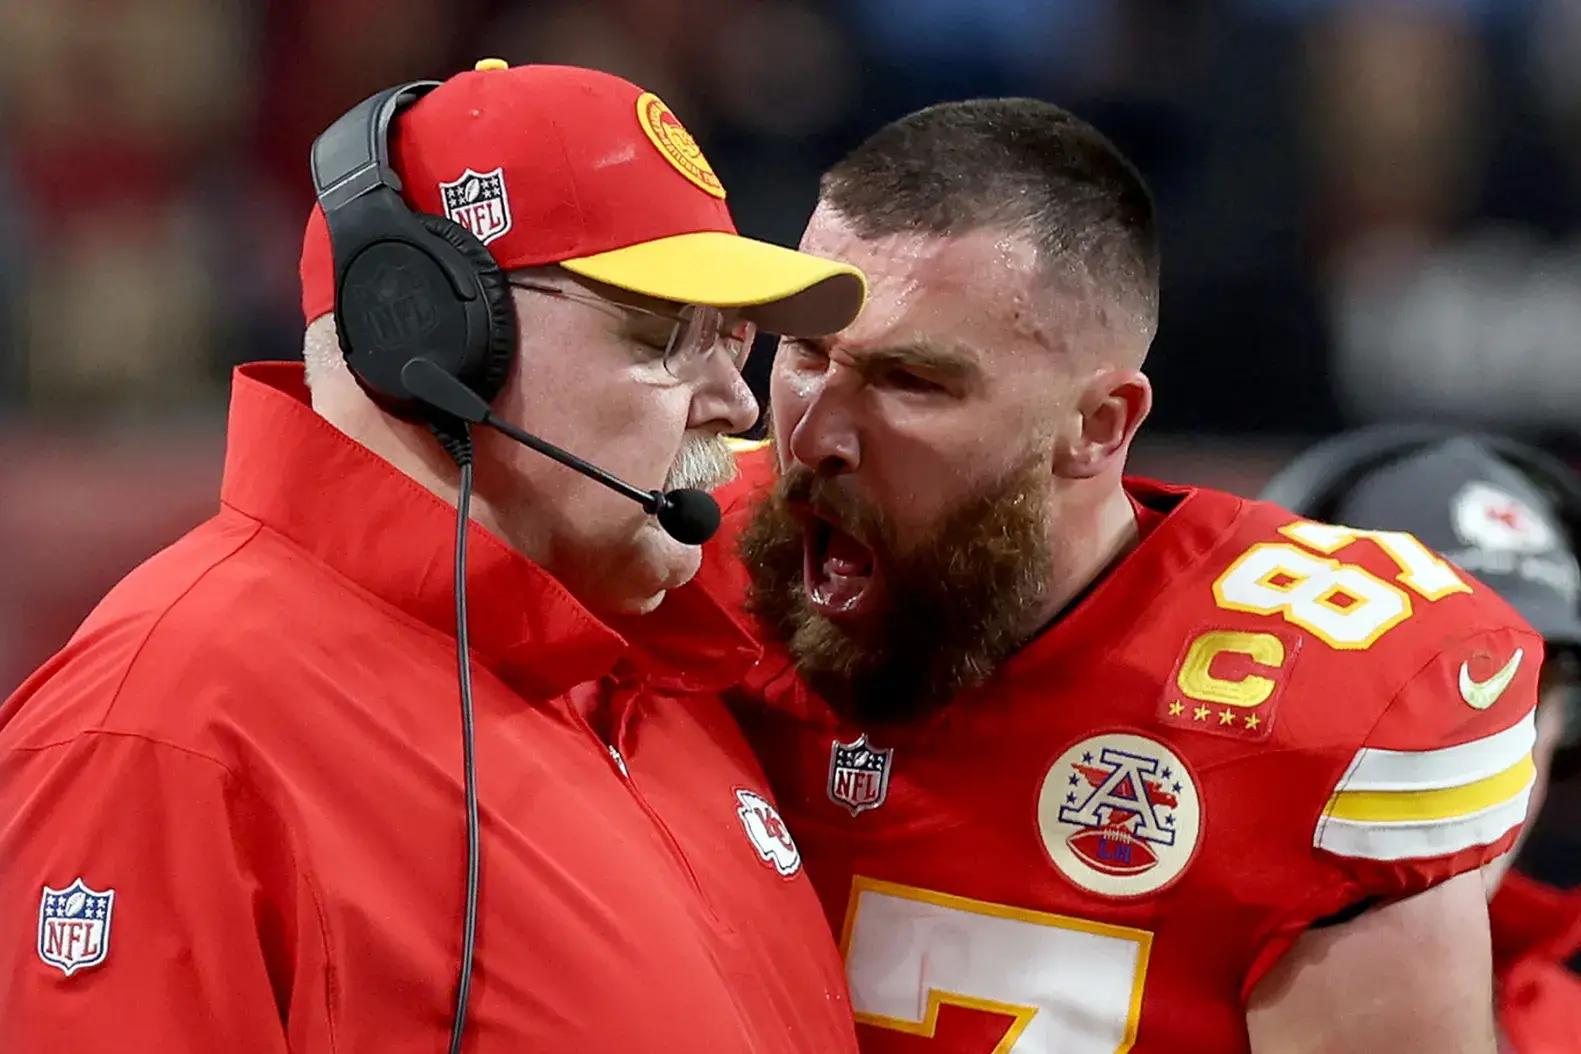 Kansas City Chiefs football player in animated discussion with coach during NFL game.